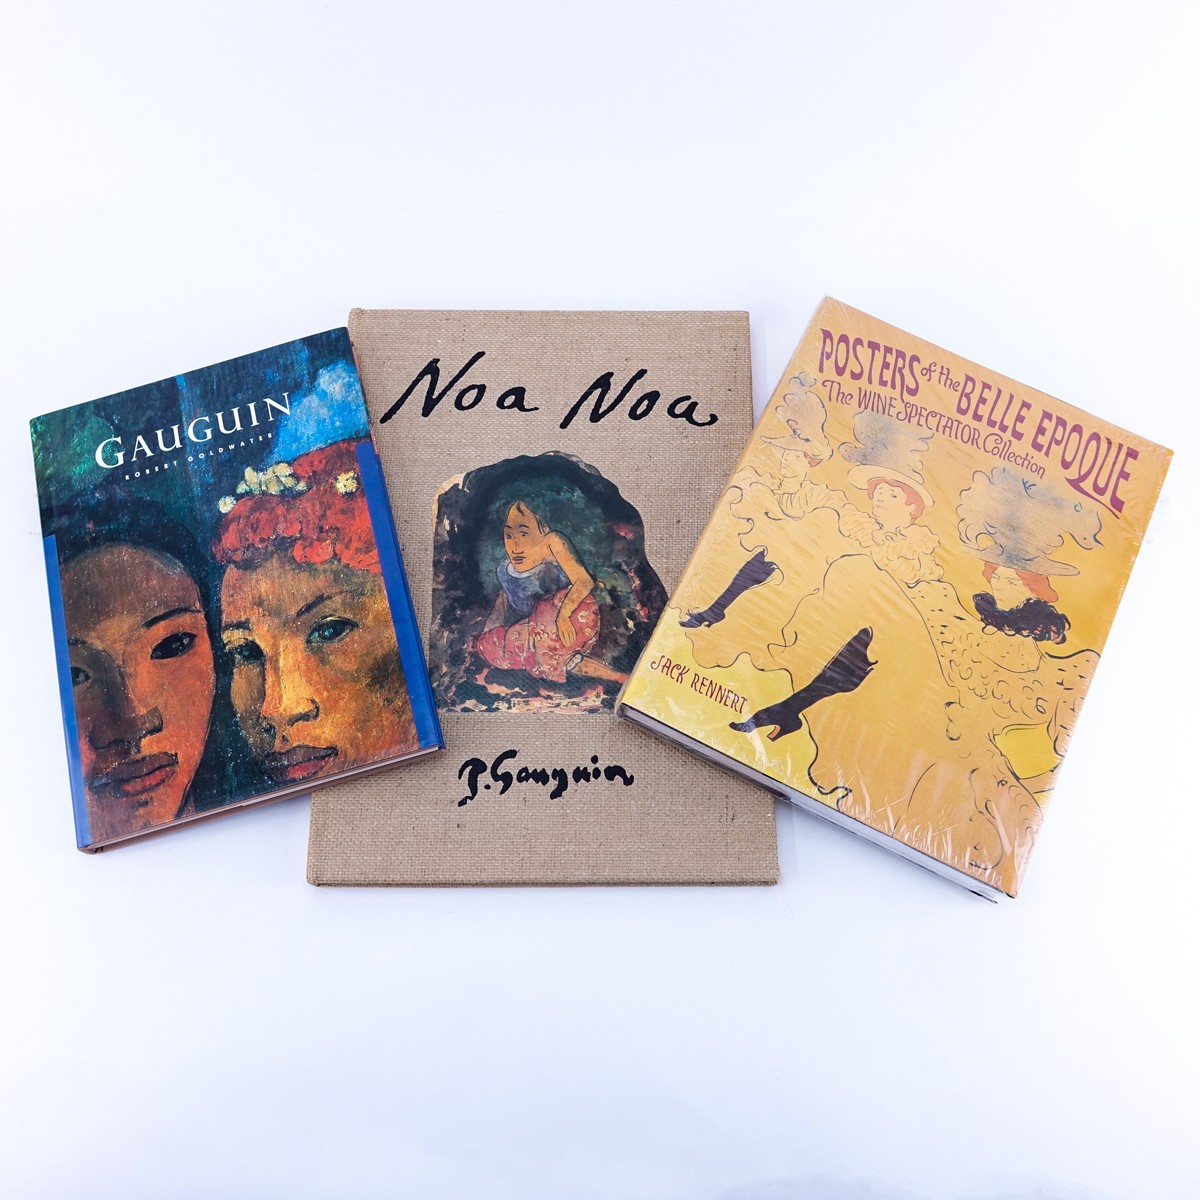 Grouping of Three (3): Paul Gauguin Hardcover book by Robert Coldwater, Paul Gauguin Noa Noa Edition Hardcover Book, and Posters of the Belle Époque: The Wine Spectator Collection Hardcover Book by Jack Rennert. All in good used condition.